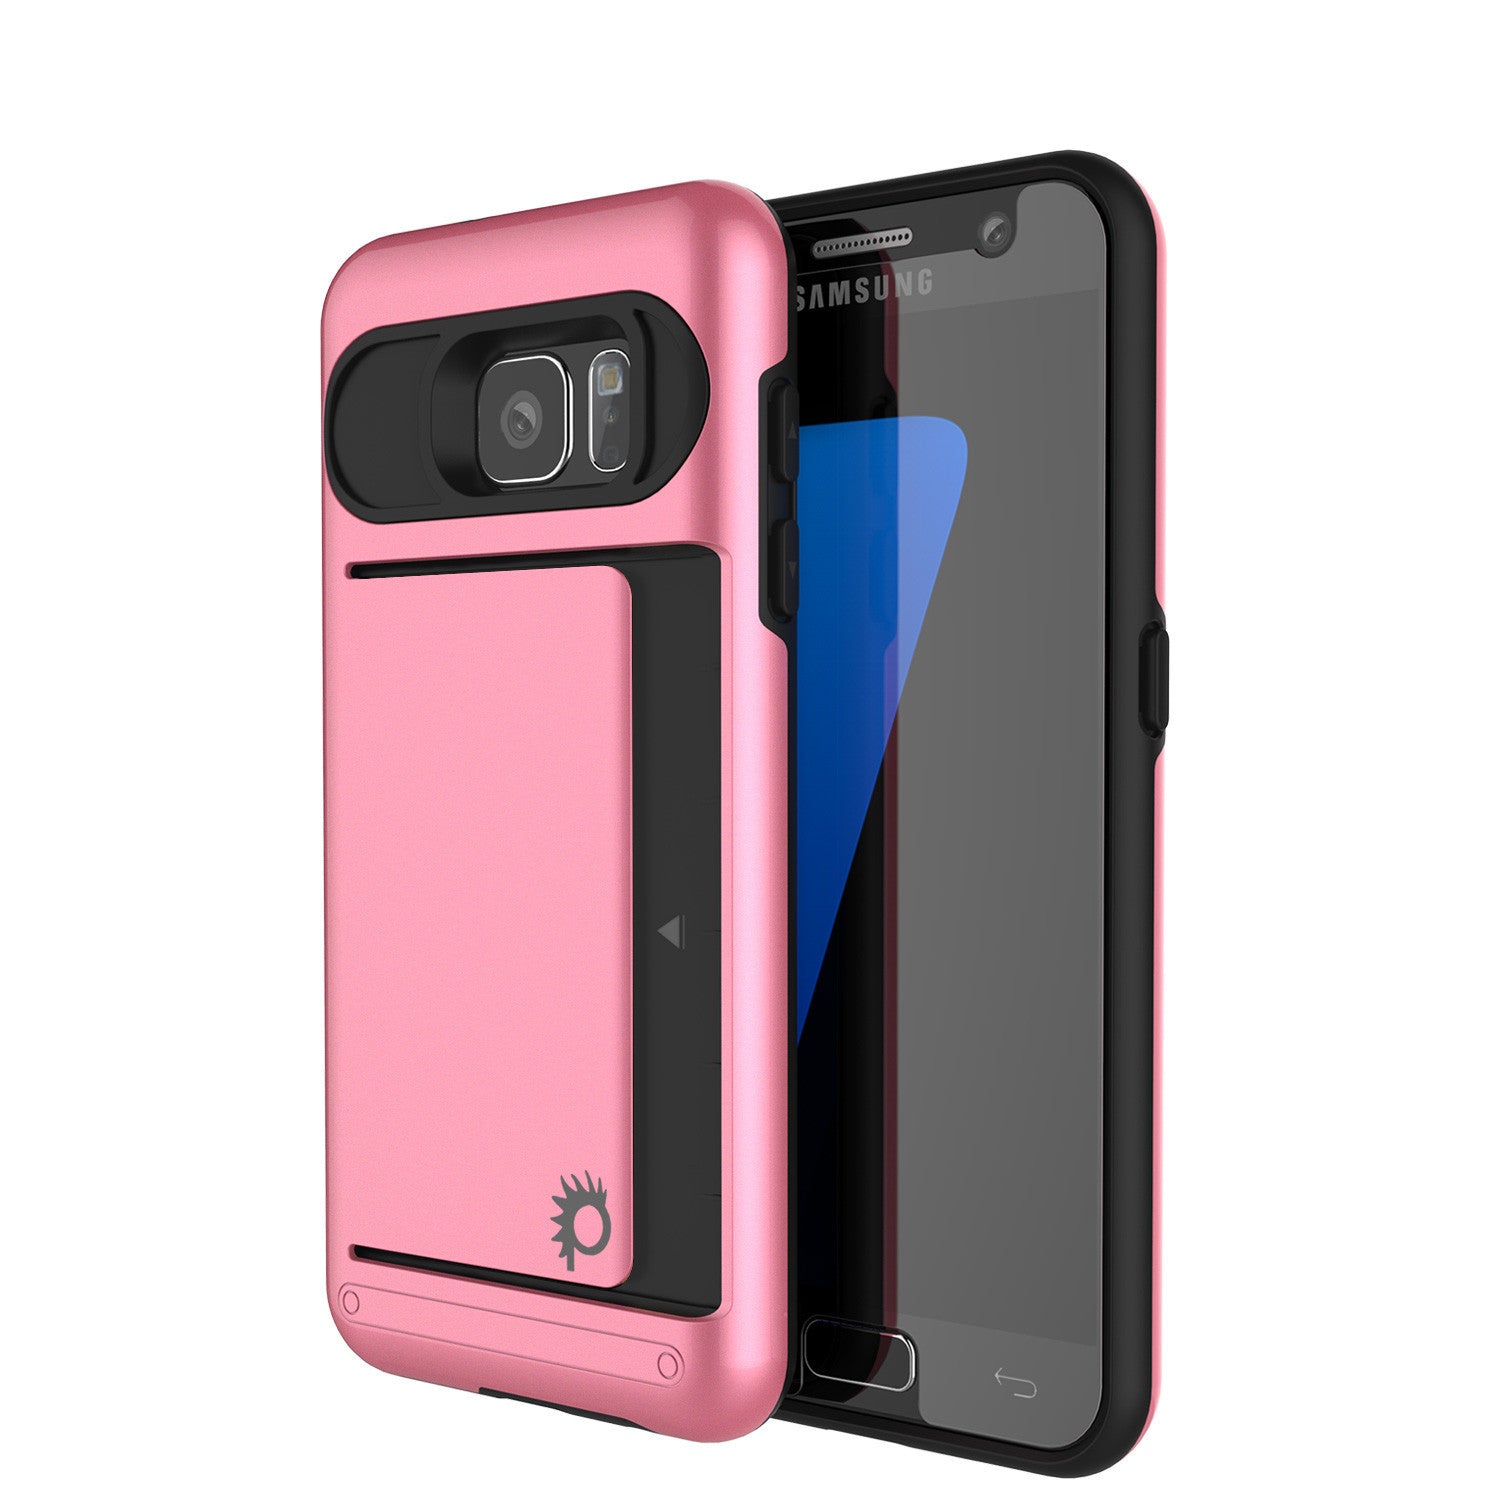 Galaxy S7 EDGE Case PunkCase CLUTCH Pink Series Slim Armor Soft Cover Case w/ Screen Protector (Color in image: Pink)